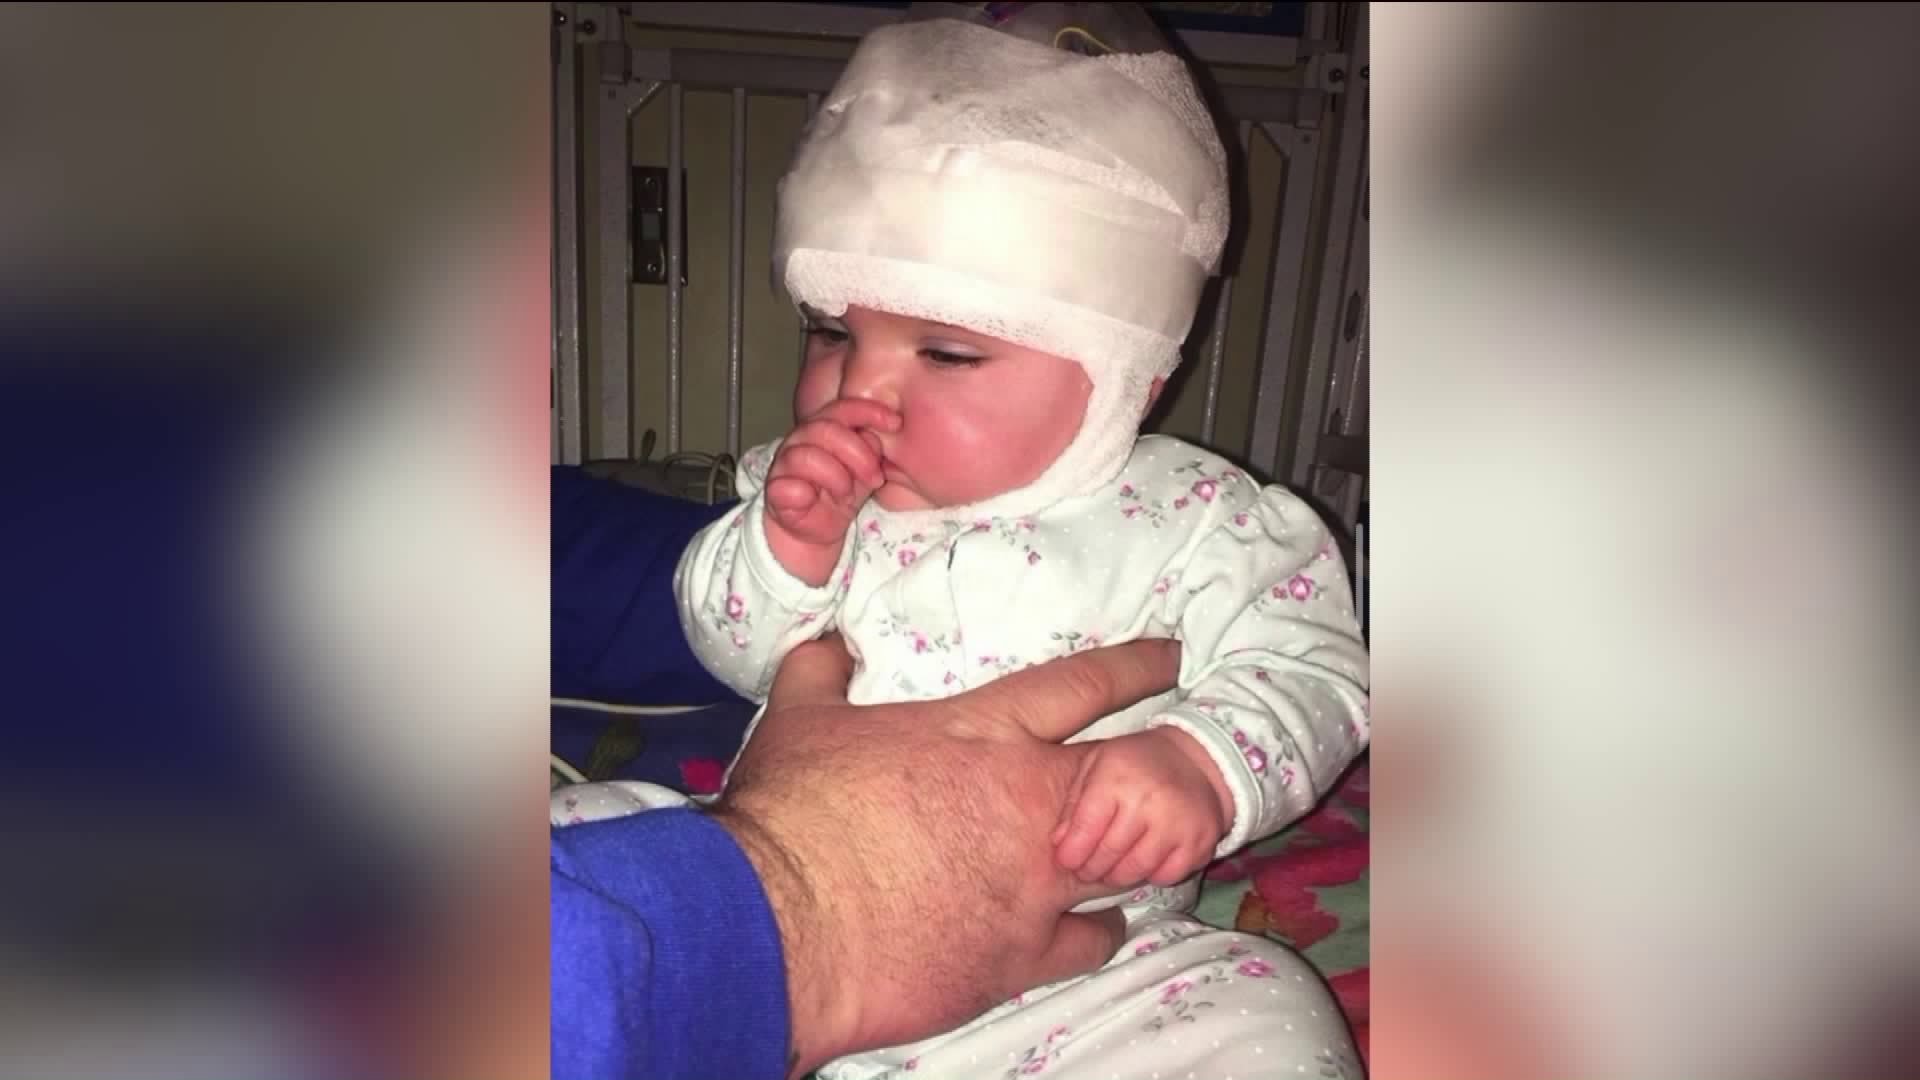 How one Connecticut family is grateful for how Giving Tuesday helps their little girl